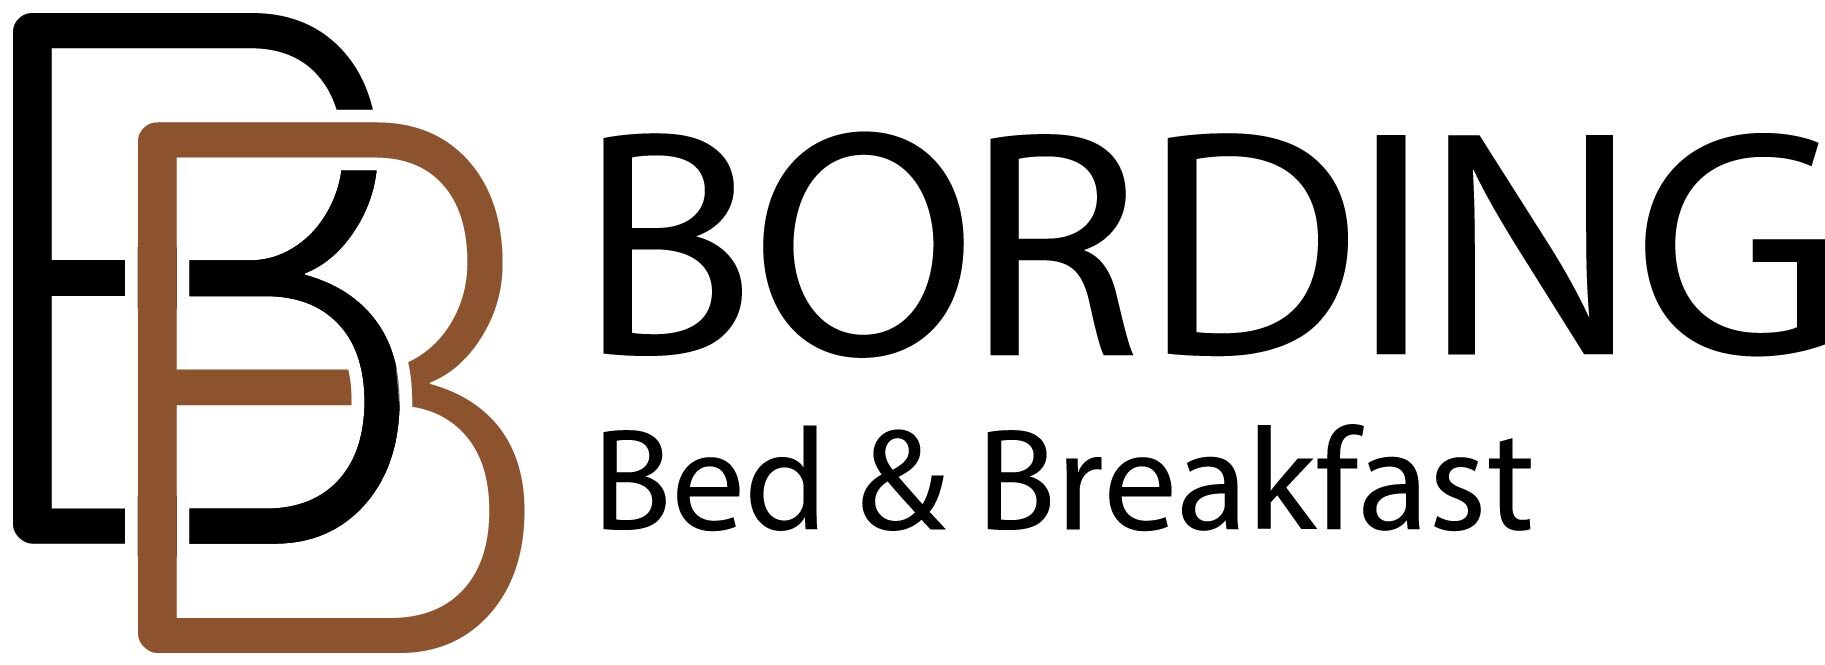 Bording Bed and Breakfast